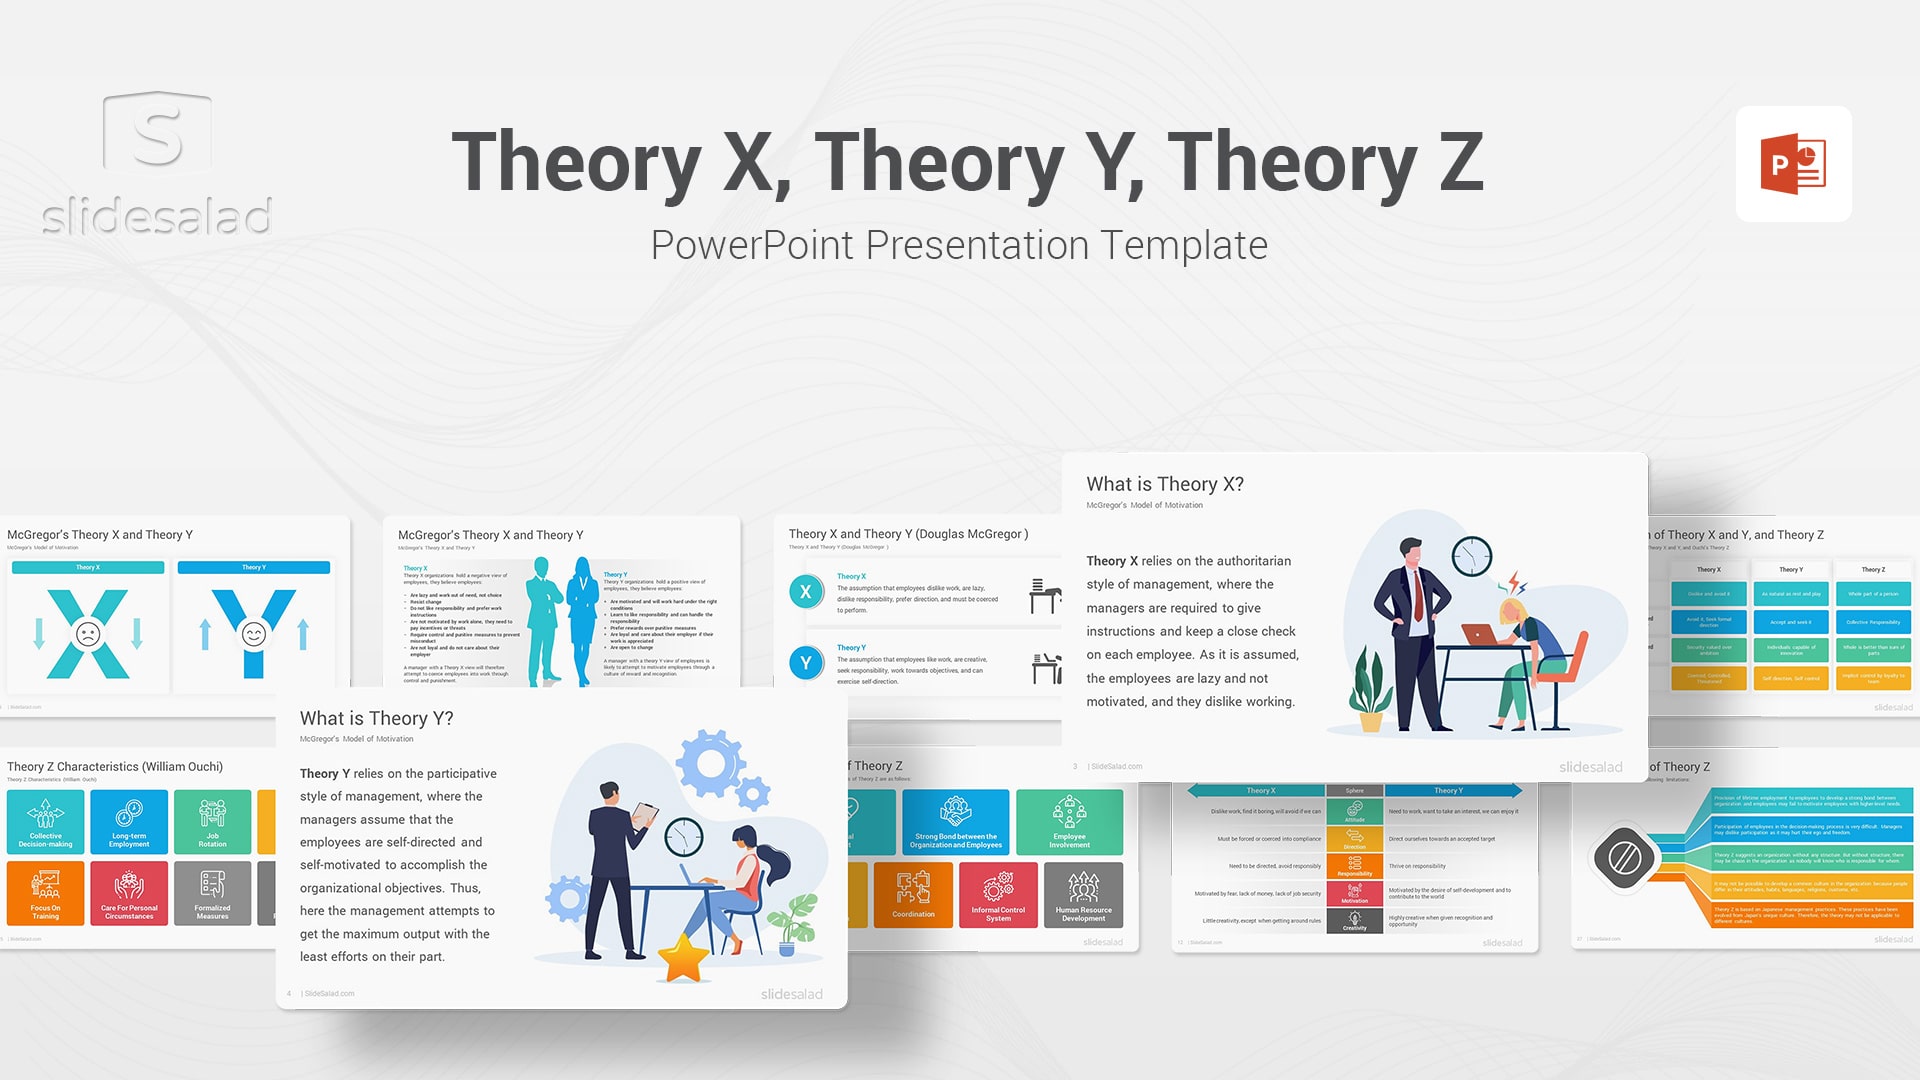 Theory X and Theory Y and Theory Z PowerPoint Template - Professional Leadership Training PowerPoint Template